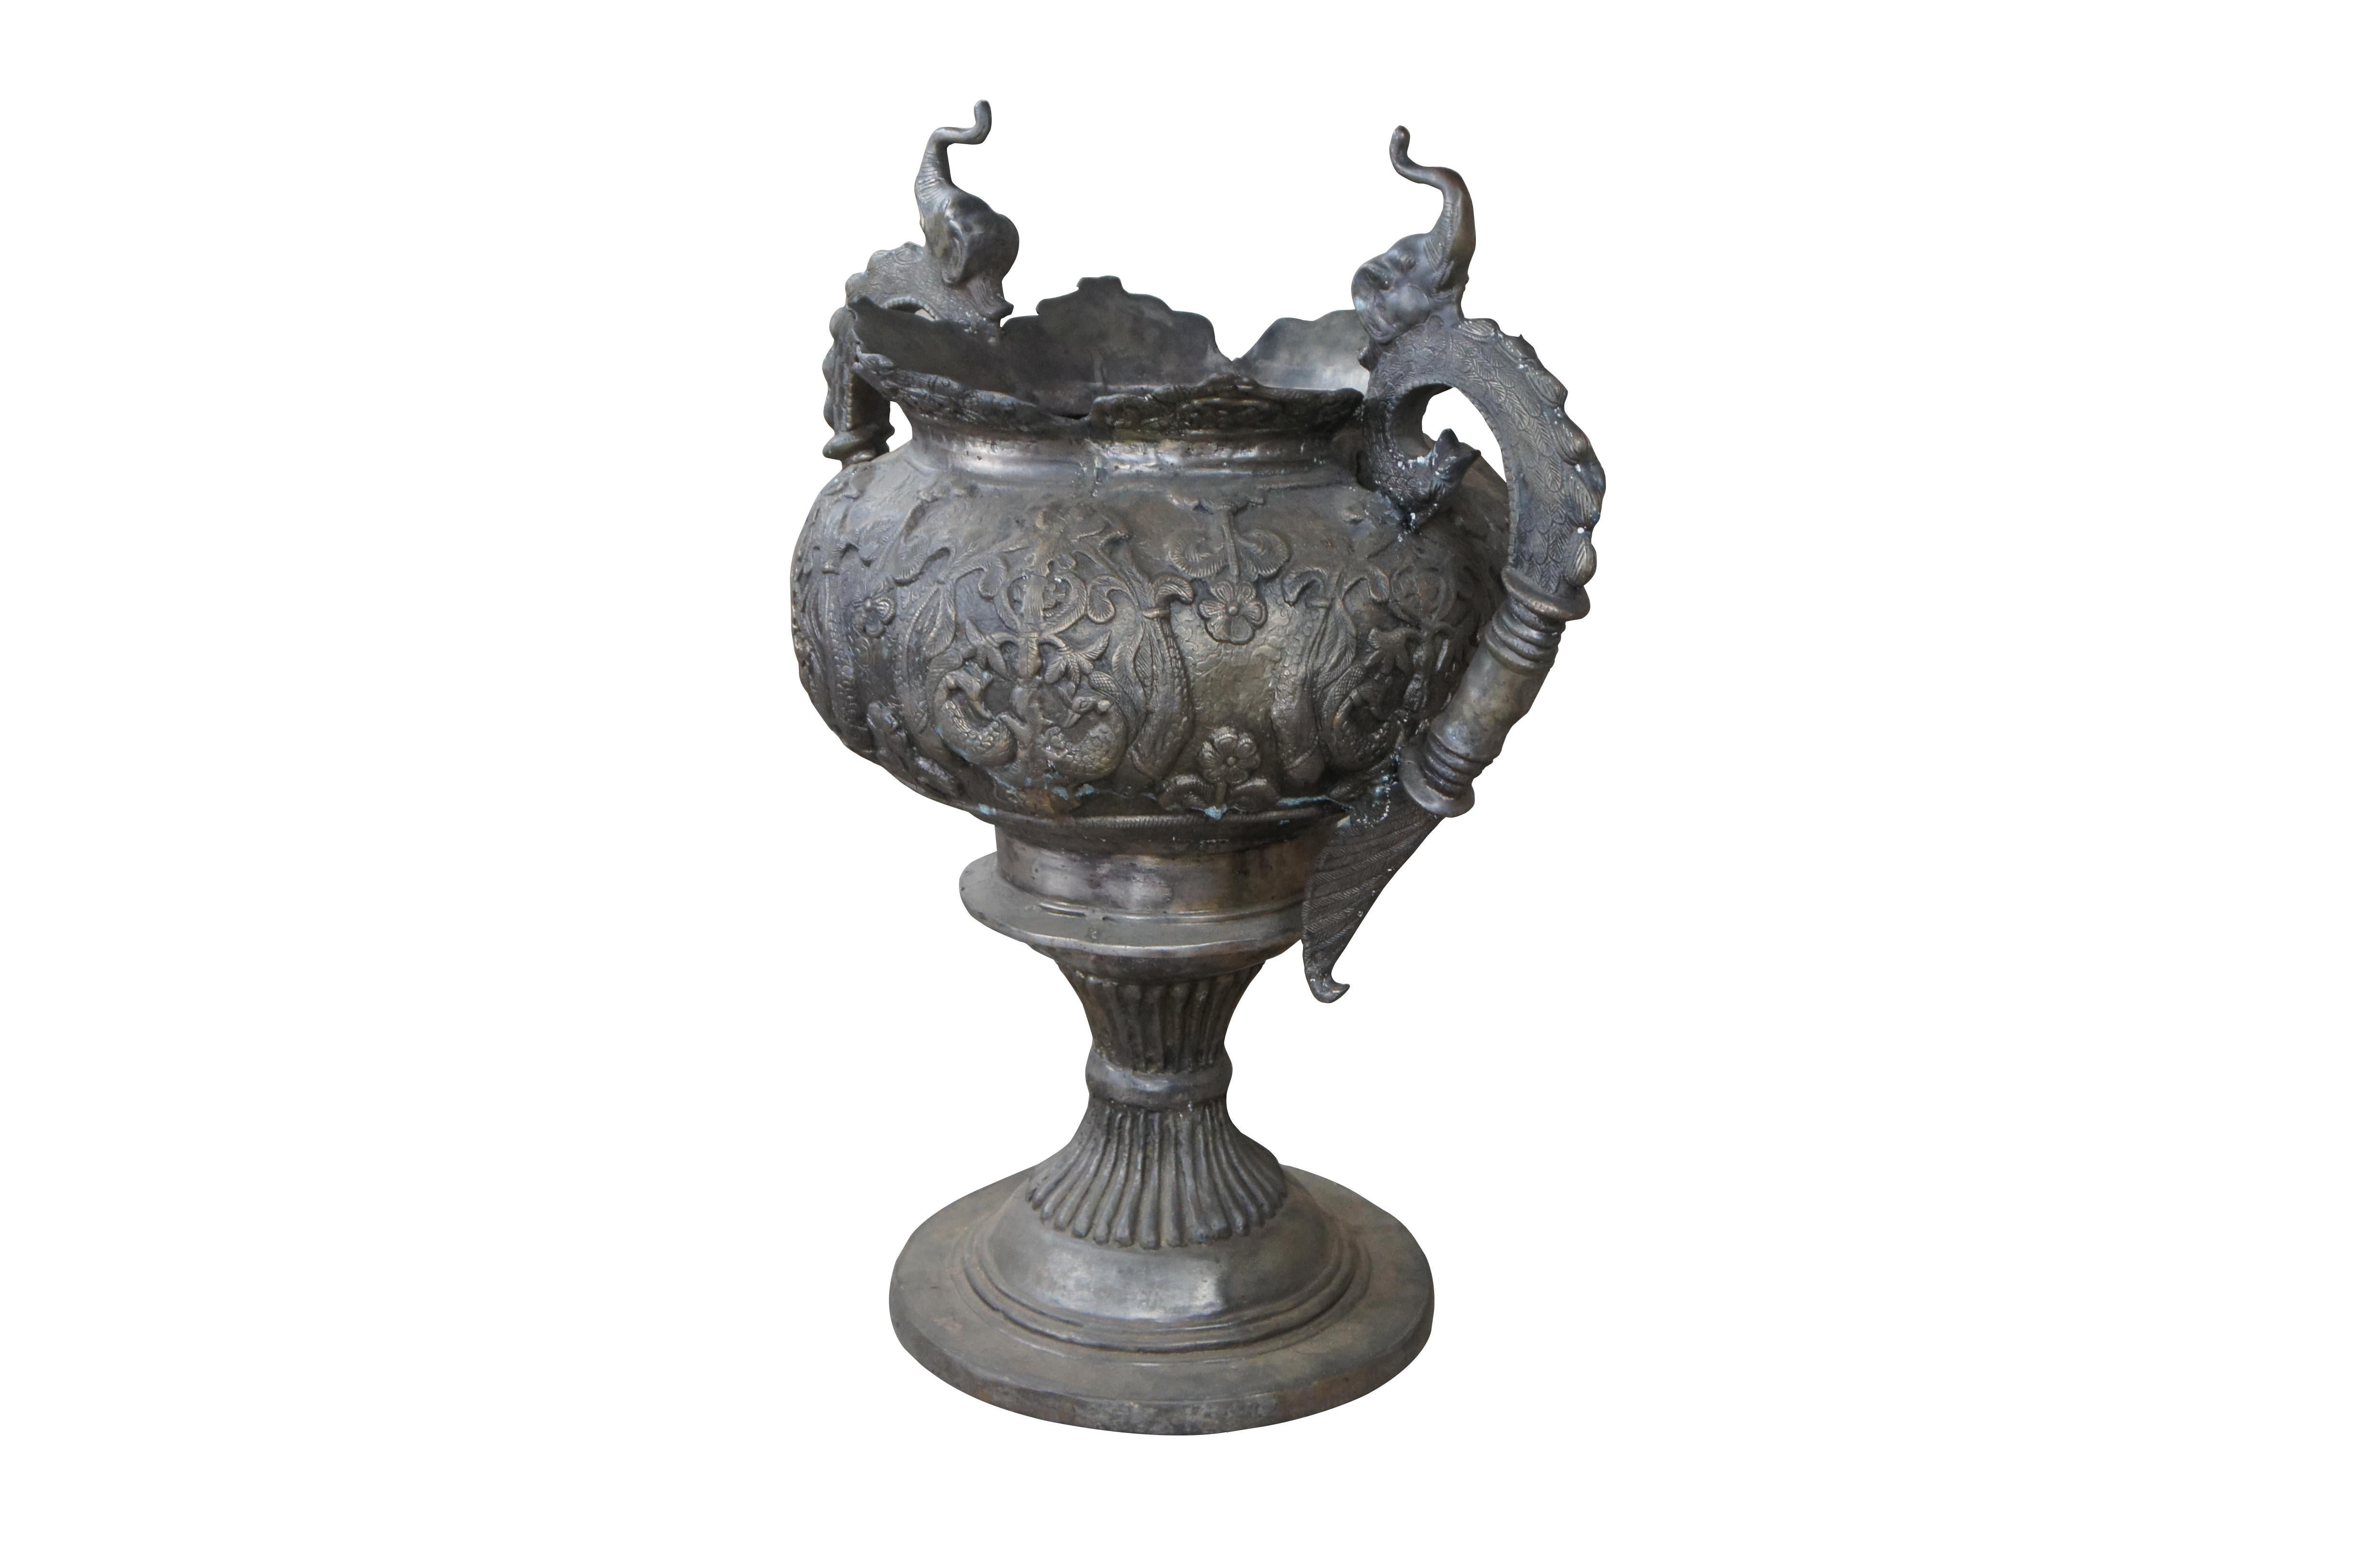 A large 20th century antiqued Indian bronze footed floor urn or planter. Features figural elephants over Phoenix / Griffin / Peacock handles. The body is decorated with birds and floral motifs over a reeded and footed base. Great for use inside your